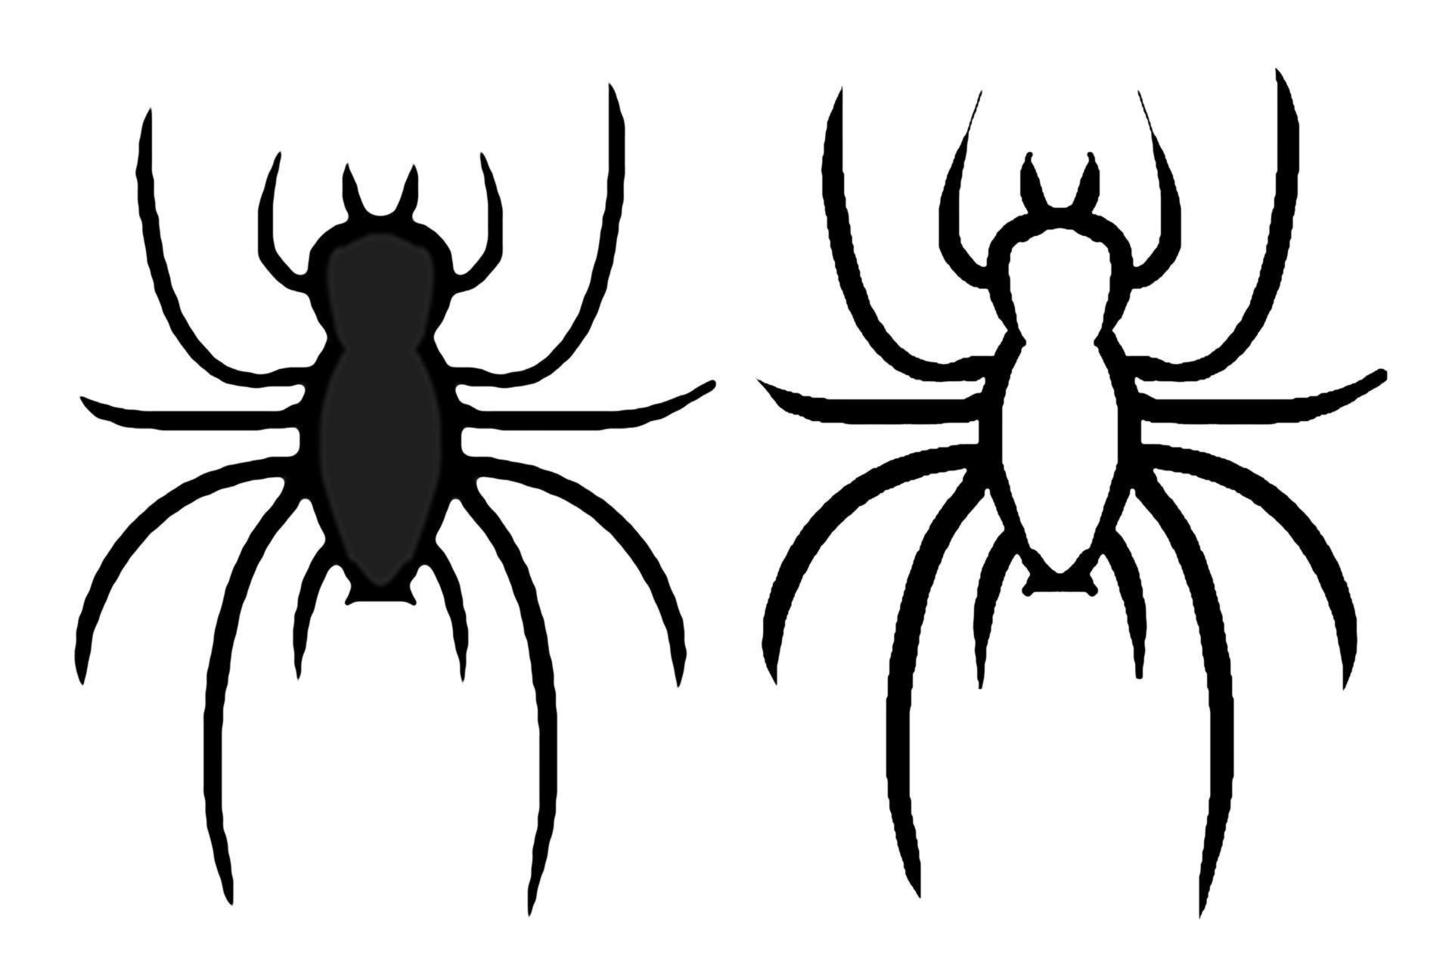 Halloween Spiders  vector illustration isolated in a white background